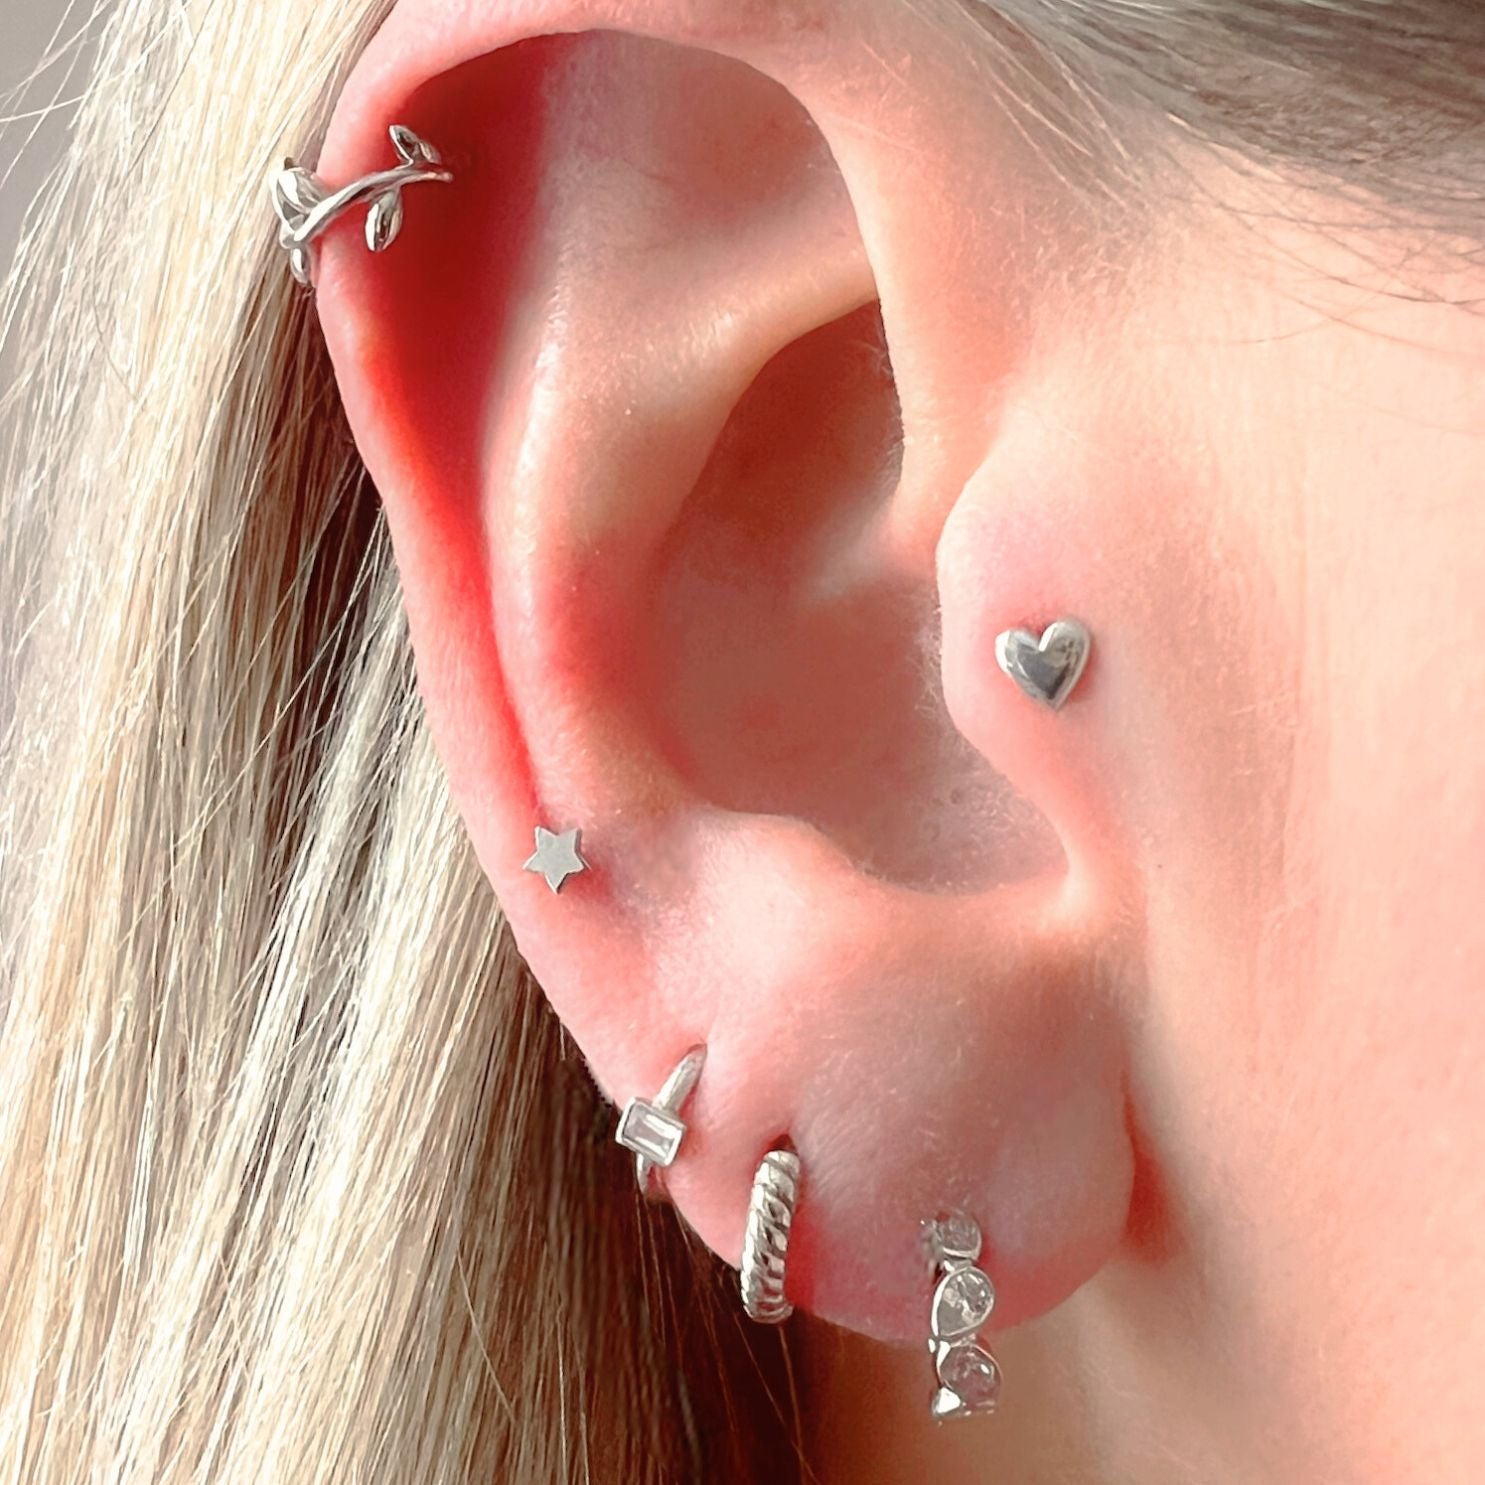 vides vine earring for helix piercing  - Helix & Conch